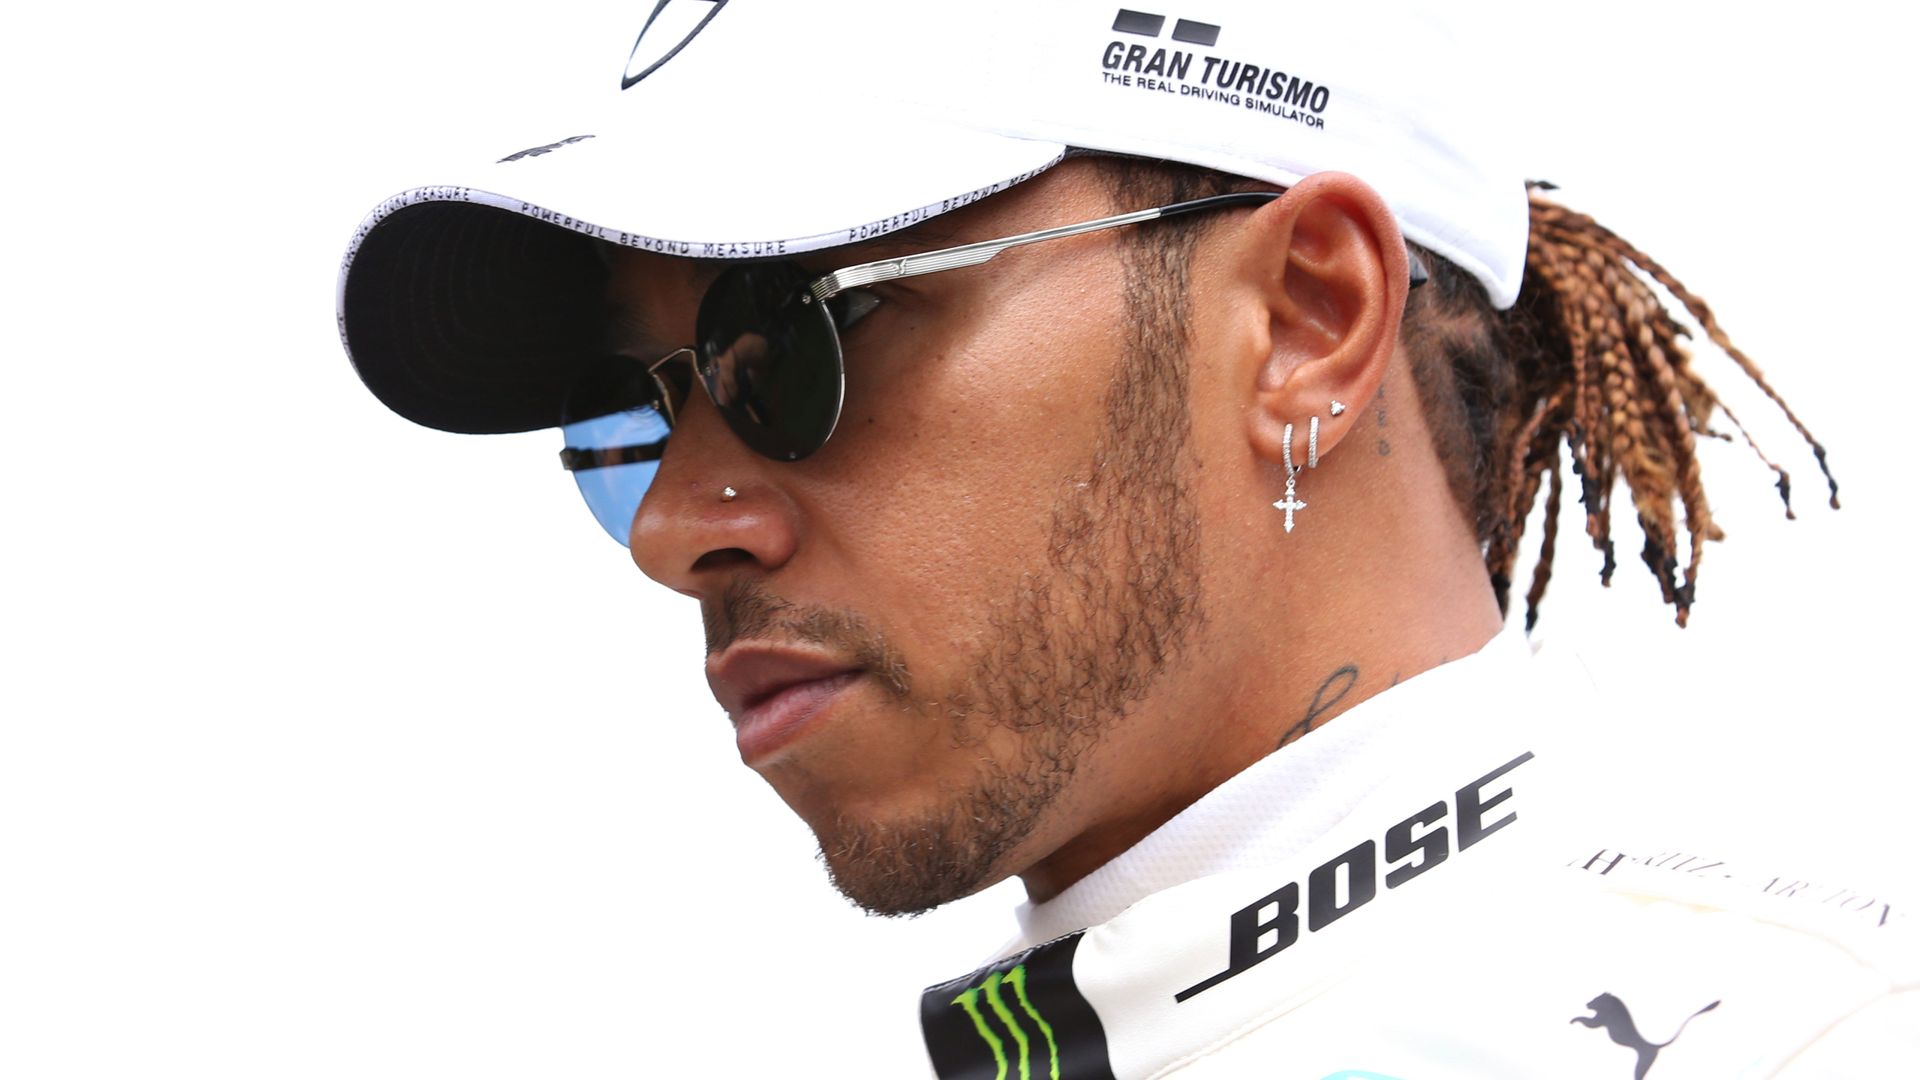 Hamilton hits out at F1 for 'silence' over George Floyd